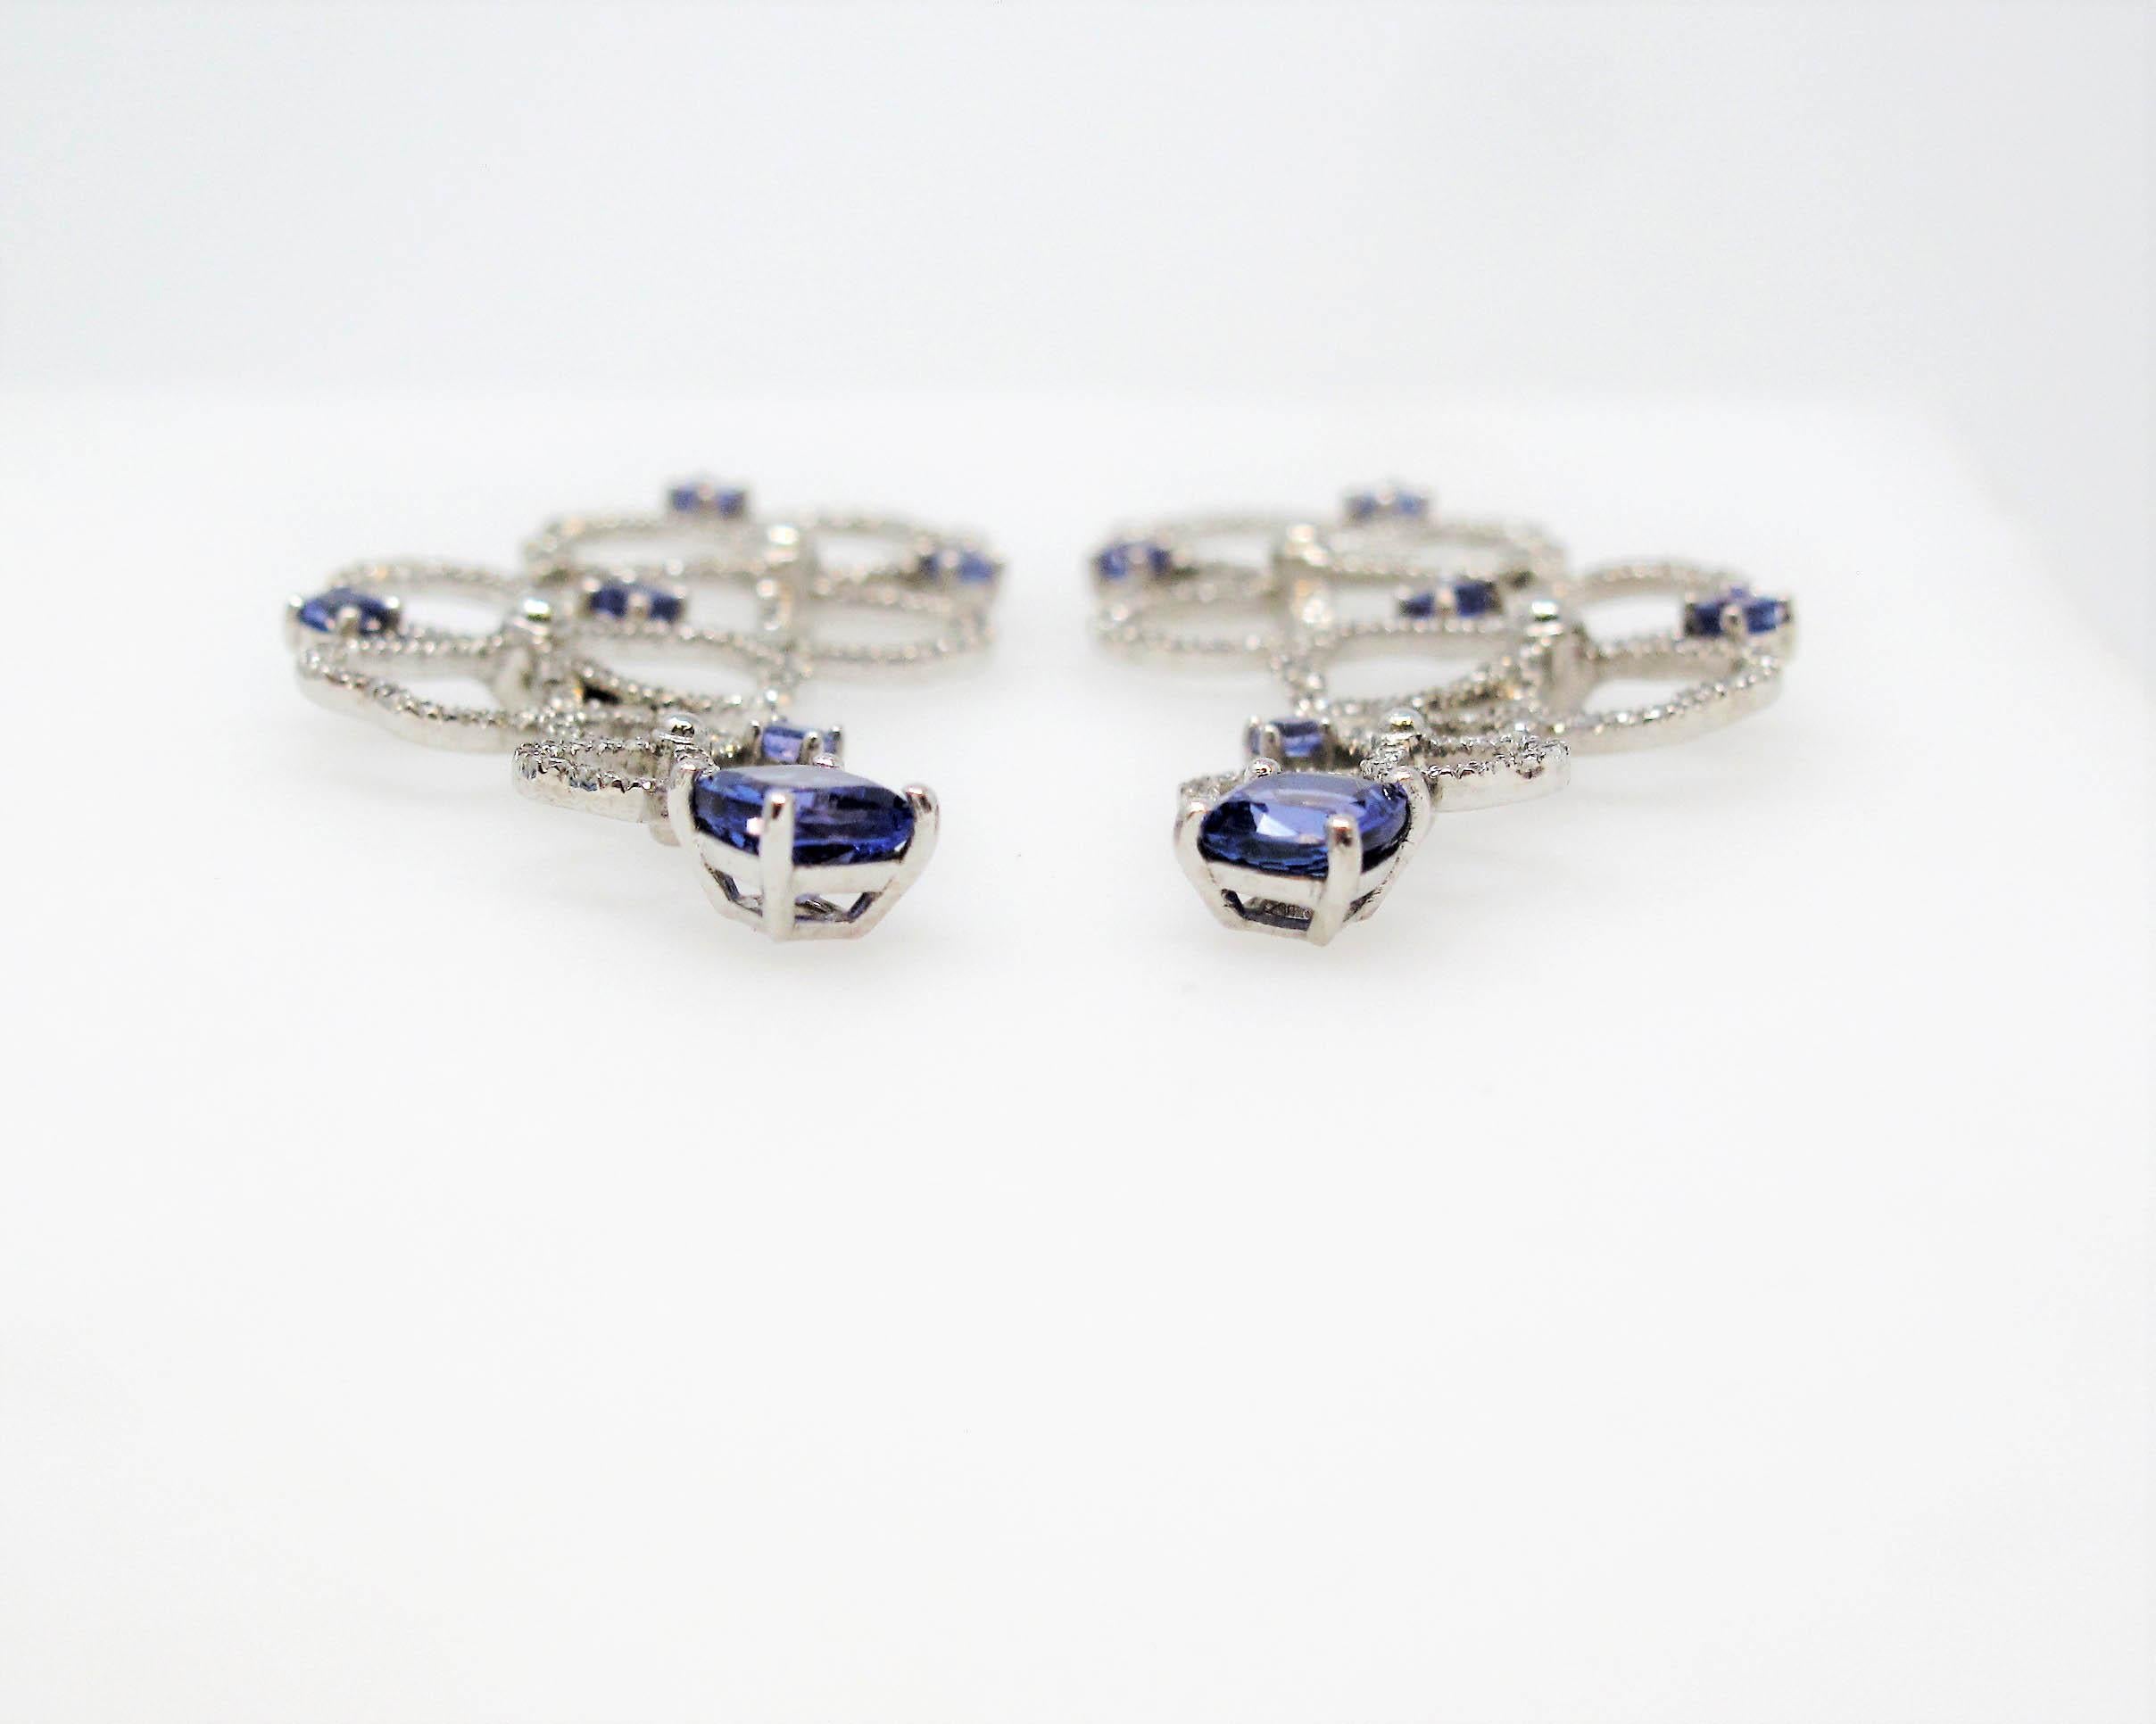 Tiffany & Co. Paper Flowers Diamond and Tanzanite Drop Earrings in Platinum In Good Condition For Sale In Scottsdale, AZ